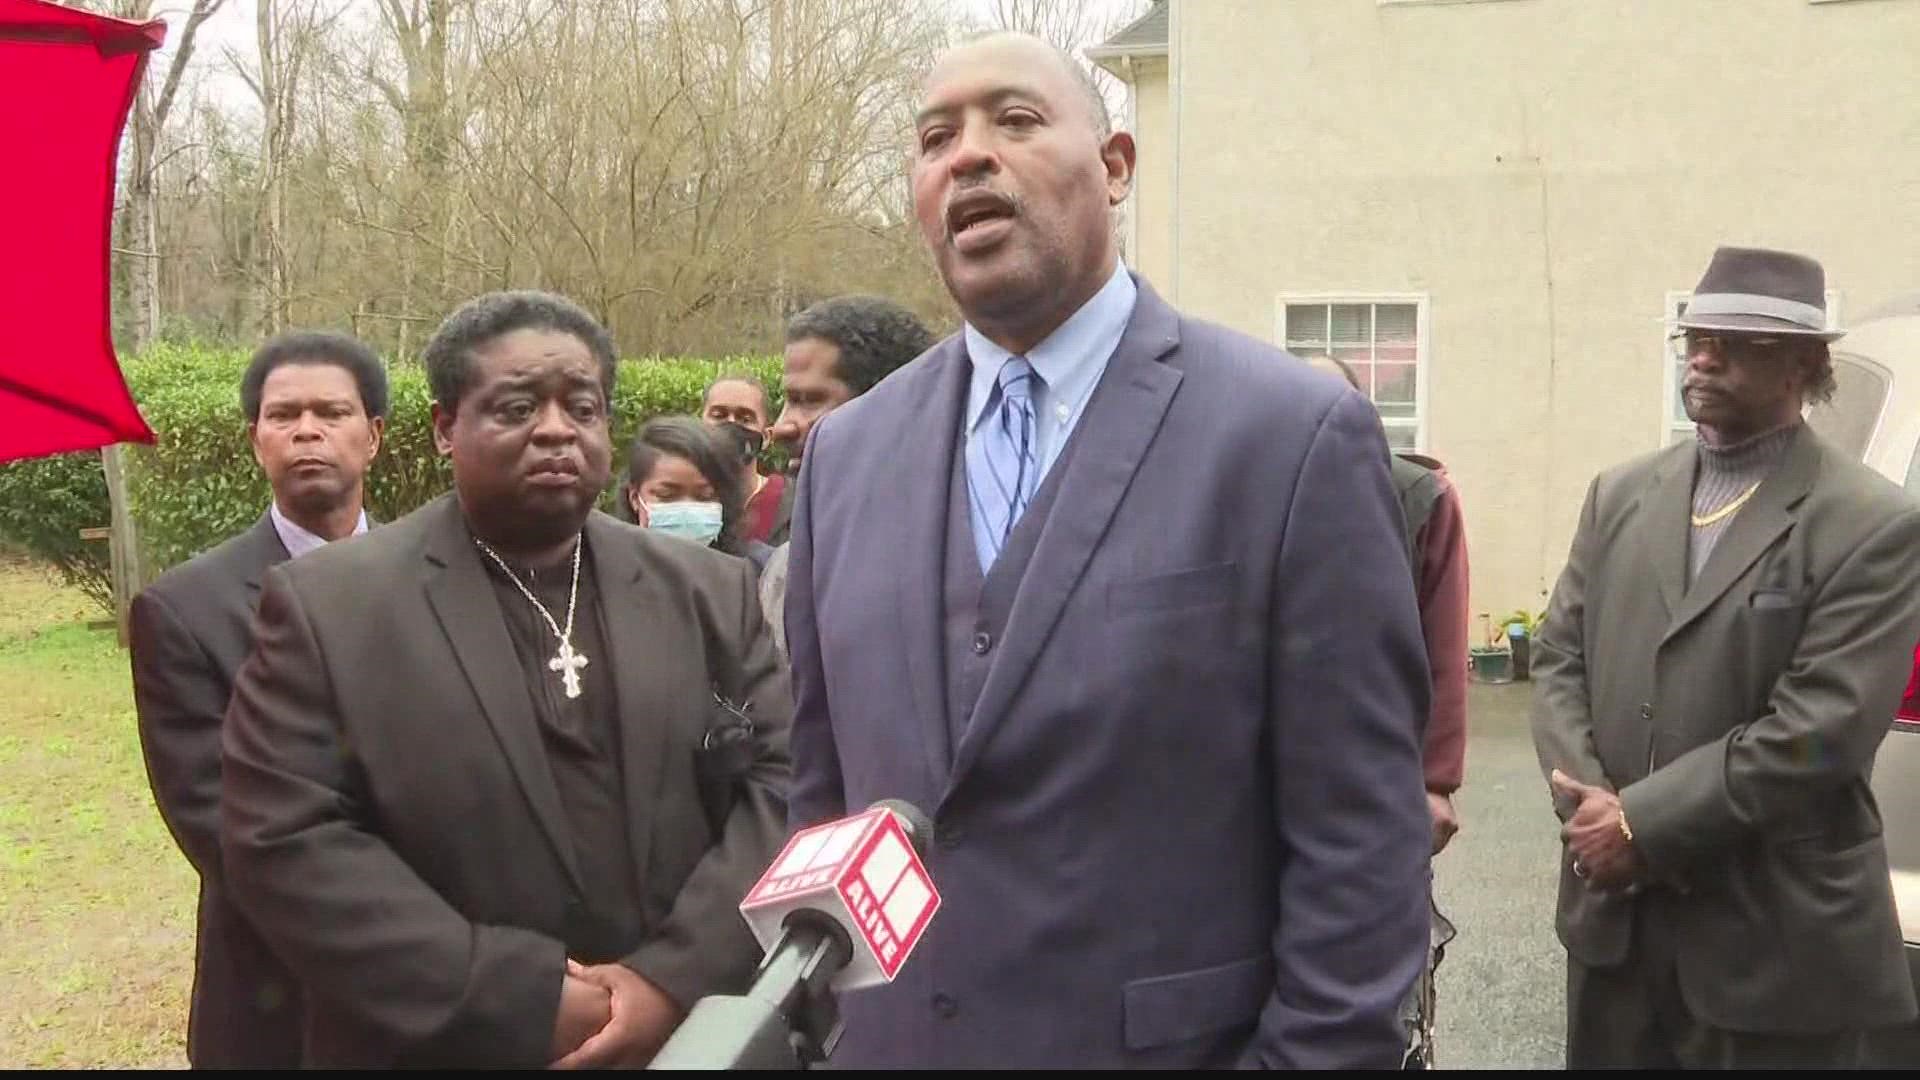 The pastor joined his lawyer for a press conference, denouncing the charges.